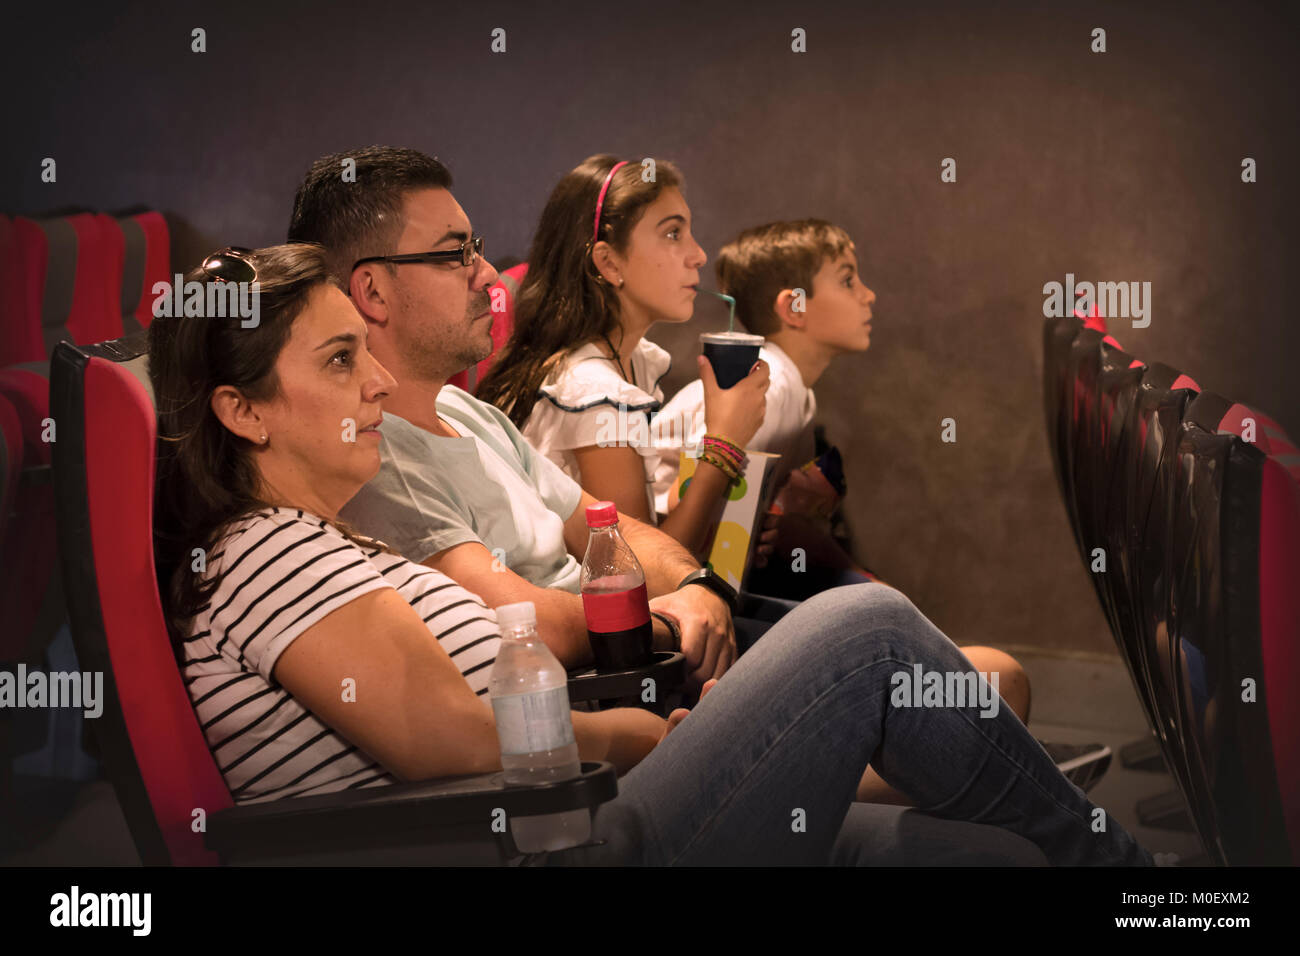 Family sitting in a cinema watching a movie Stock Photo